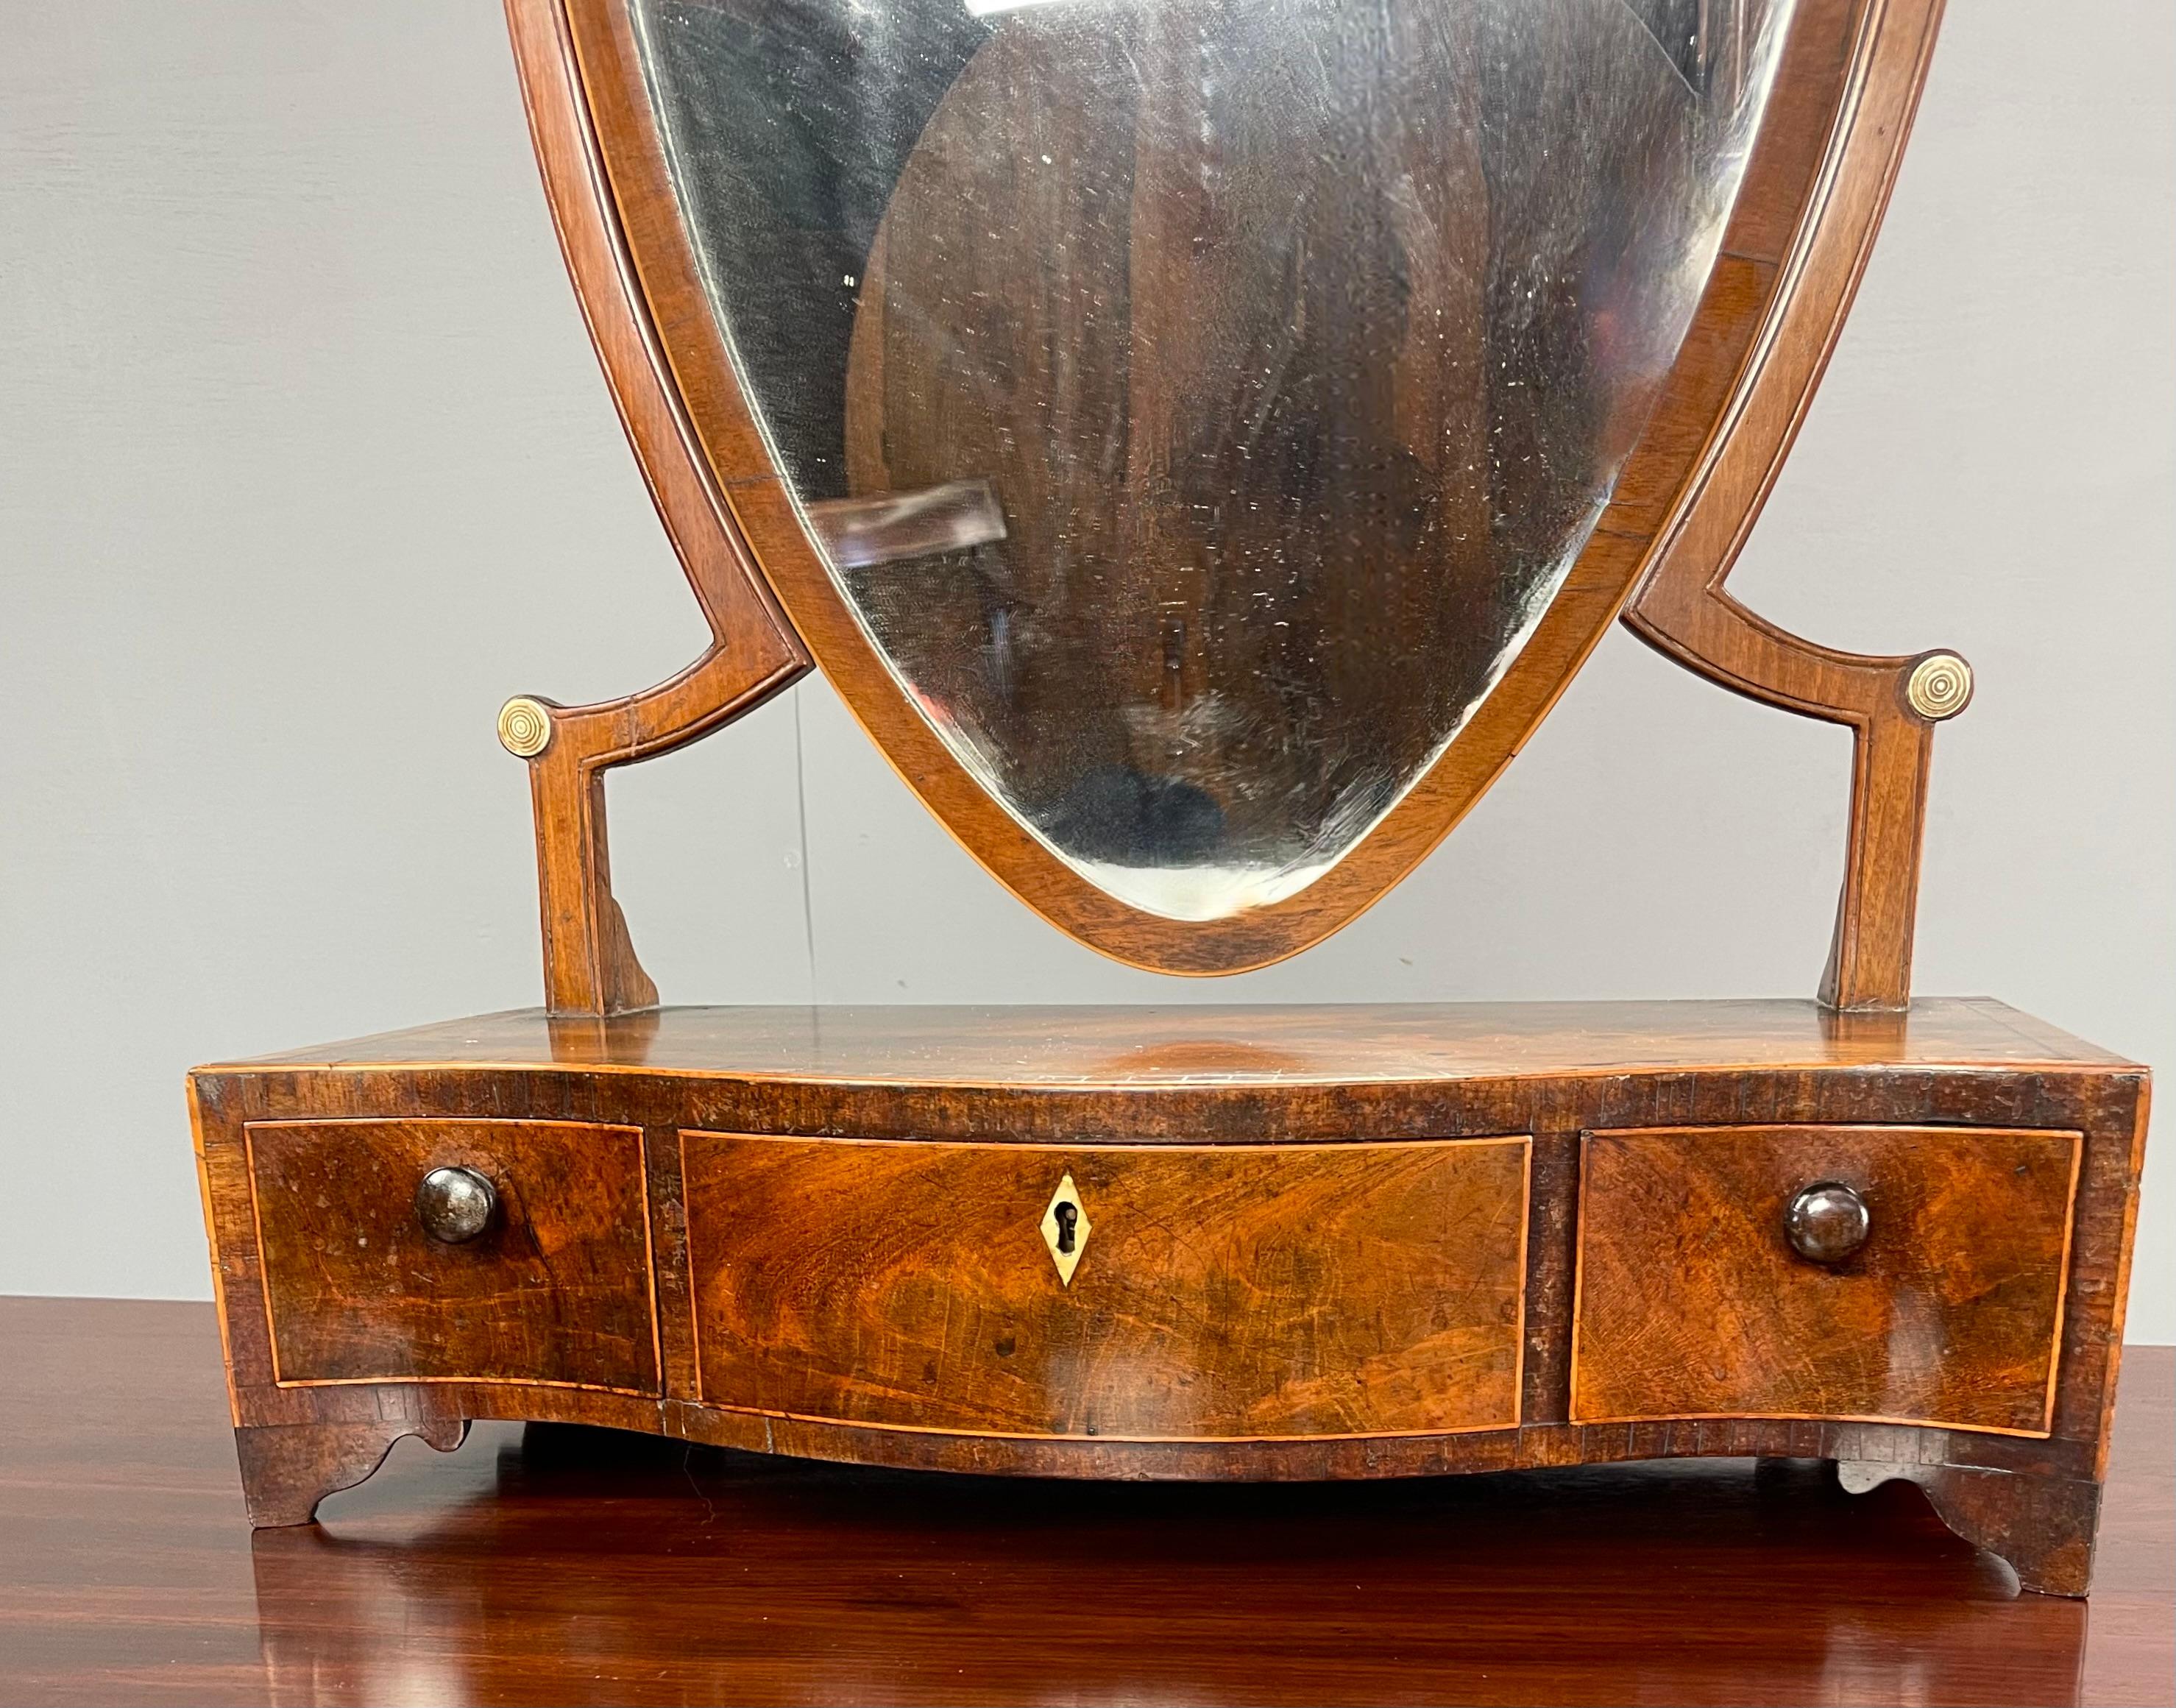 A Sheraton period, late 18th century, serpentine fronted, 3 drawer toilet mirror having a shield shaped glass.
This is a lovely proportioned little mirror with good figuring and boxwood stringing standing on ogee bracket feet.
The swing mirror is